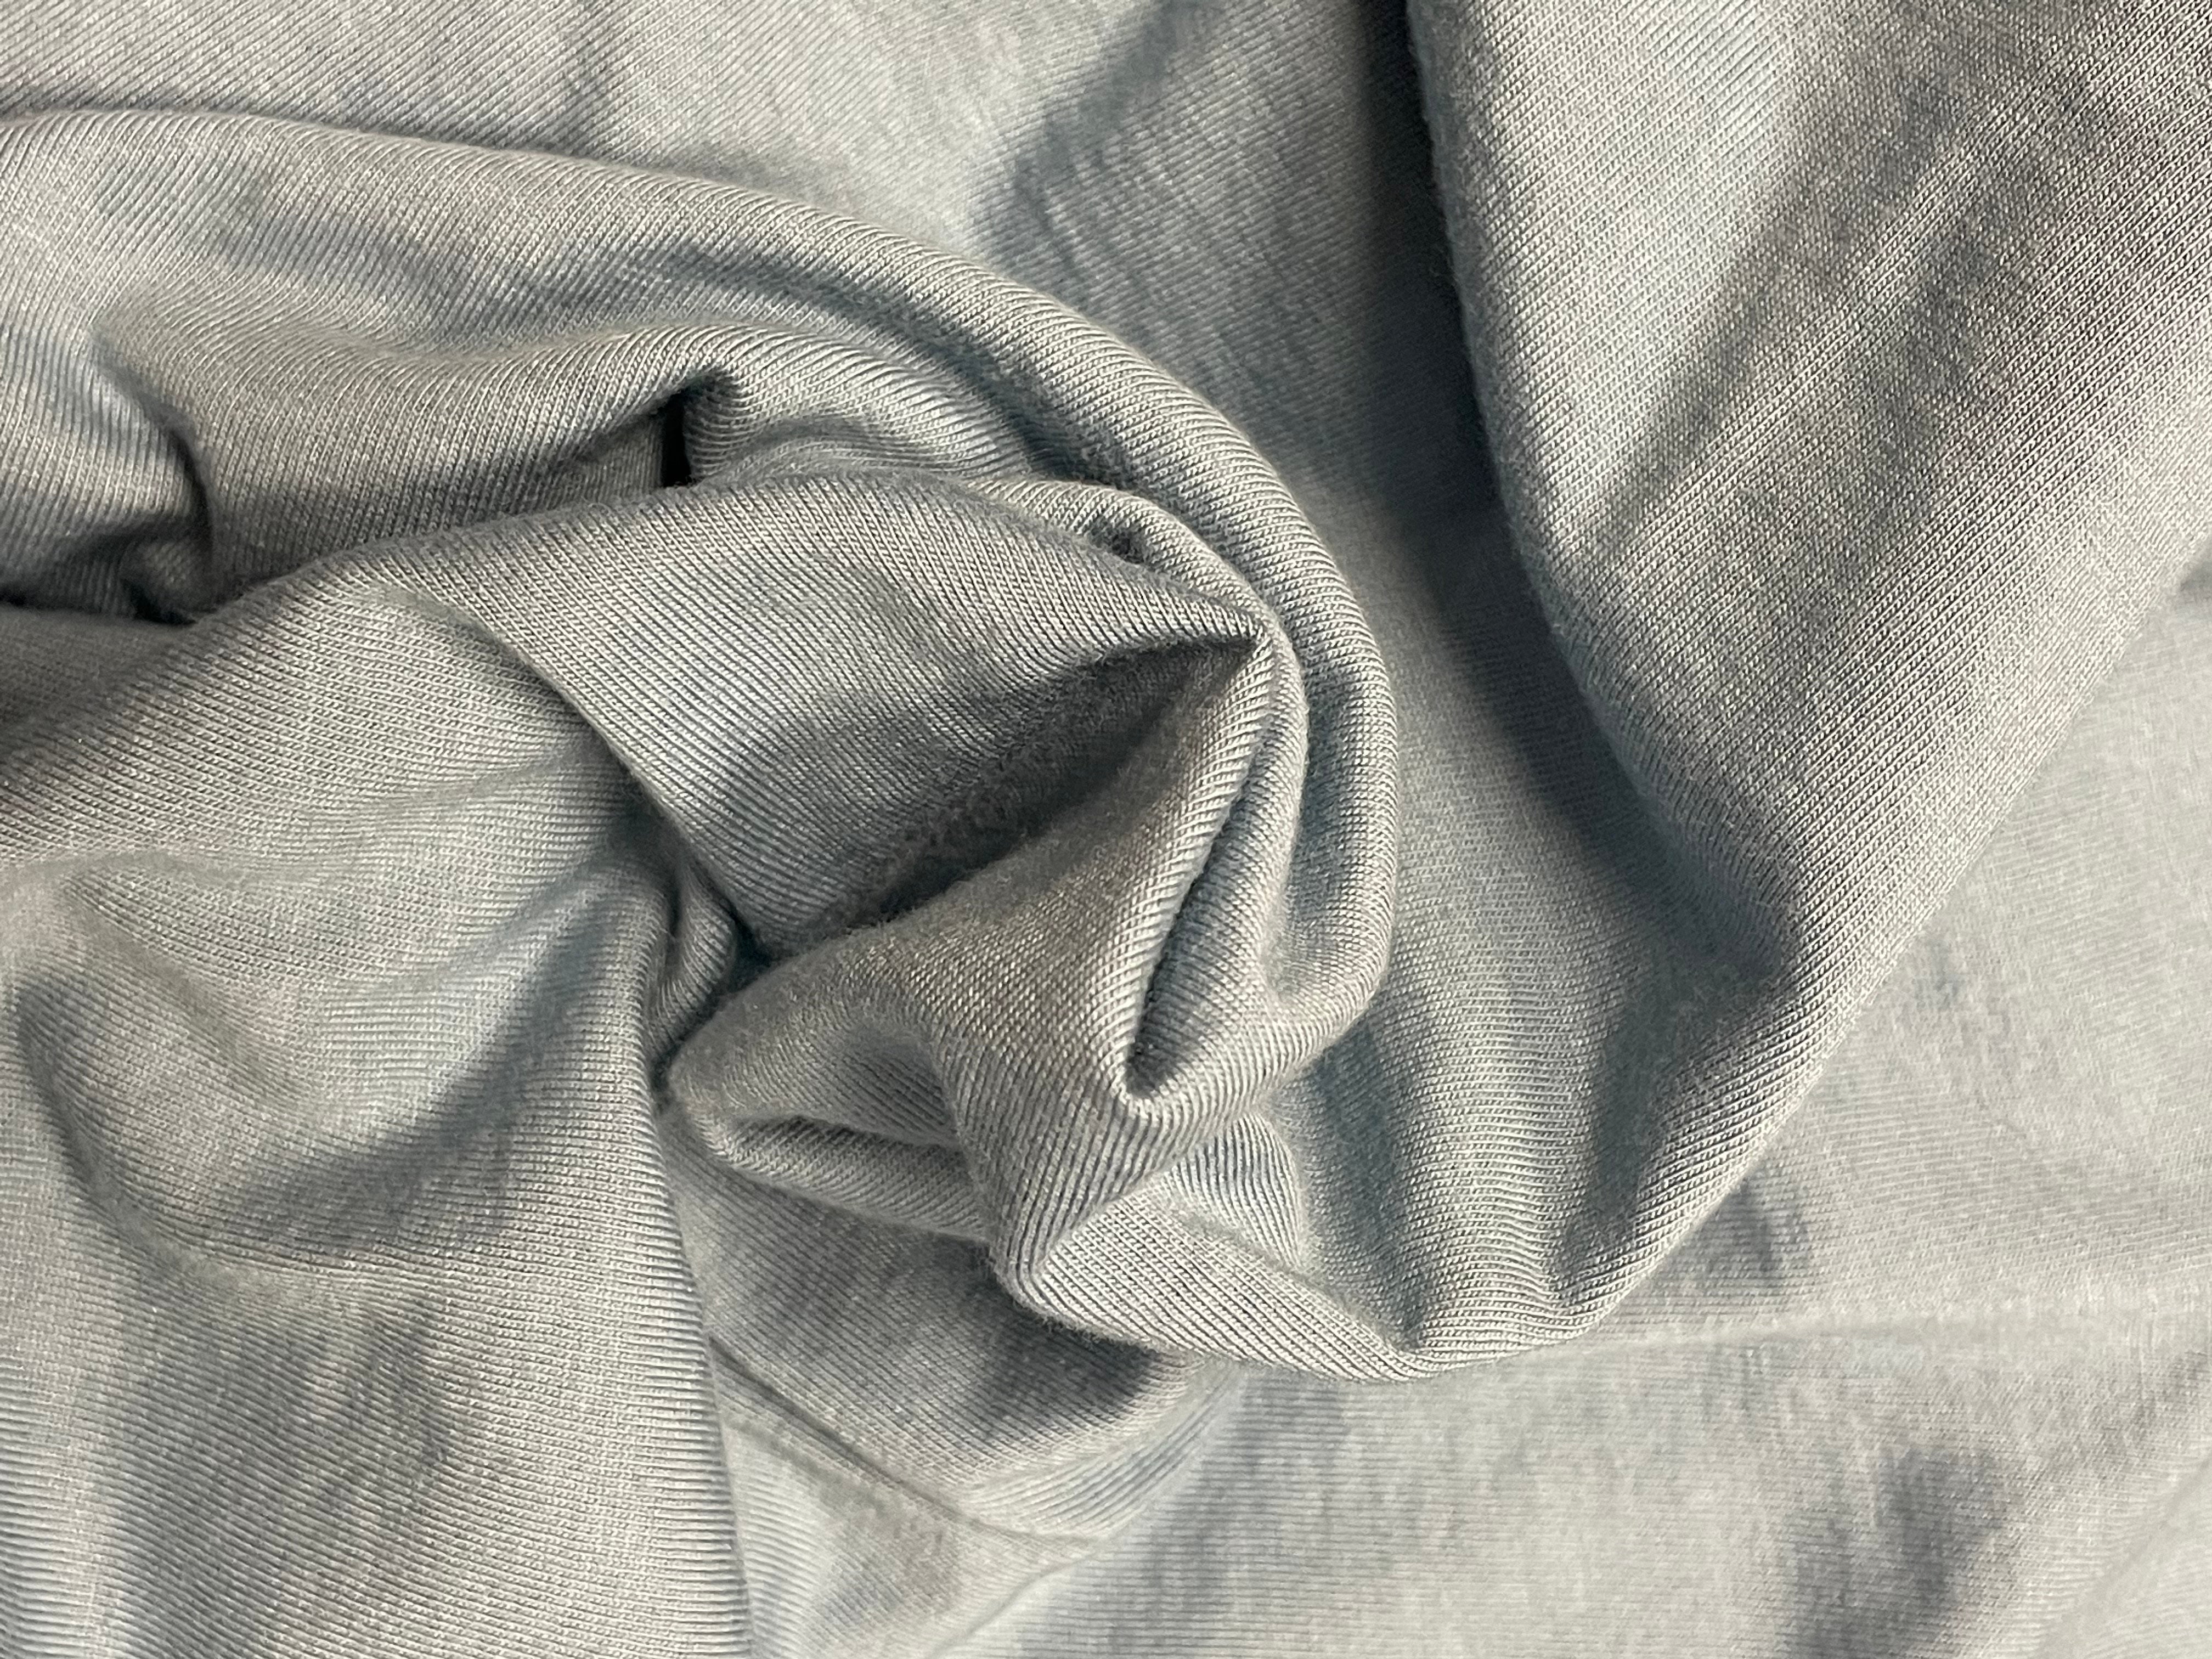 Polyester Rayon Blended Fabric-With Nice Herring Bone Texture